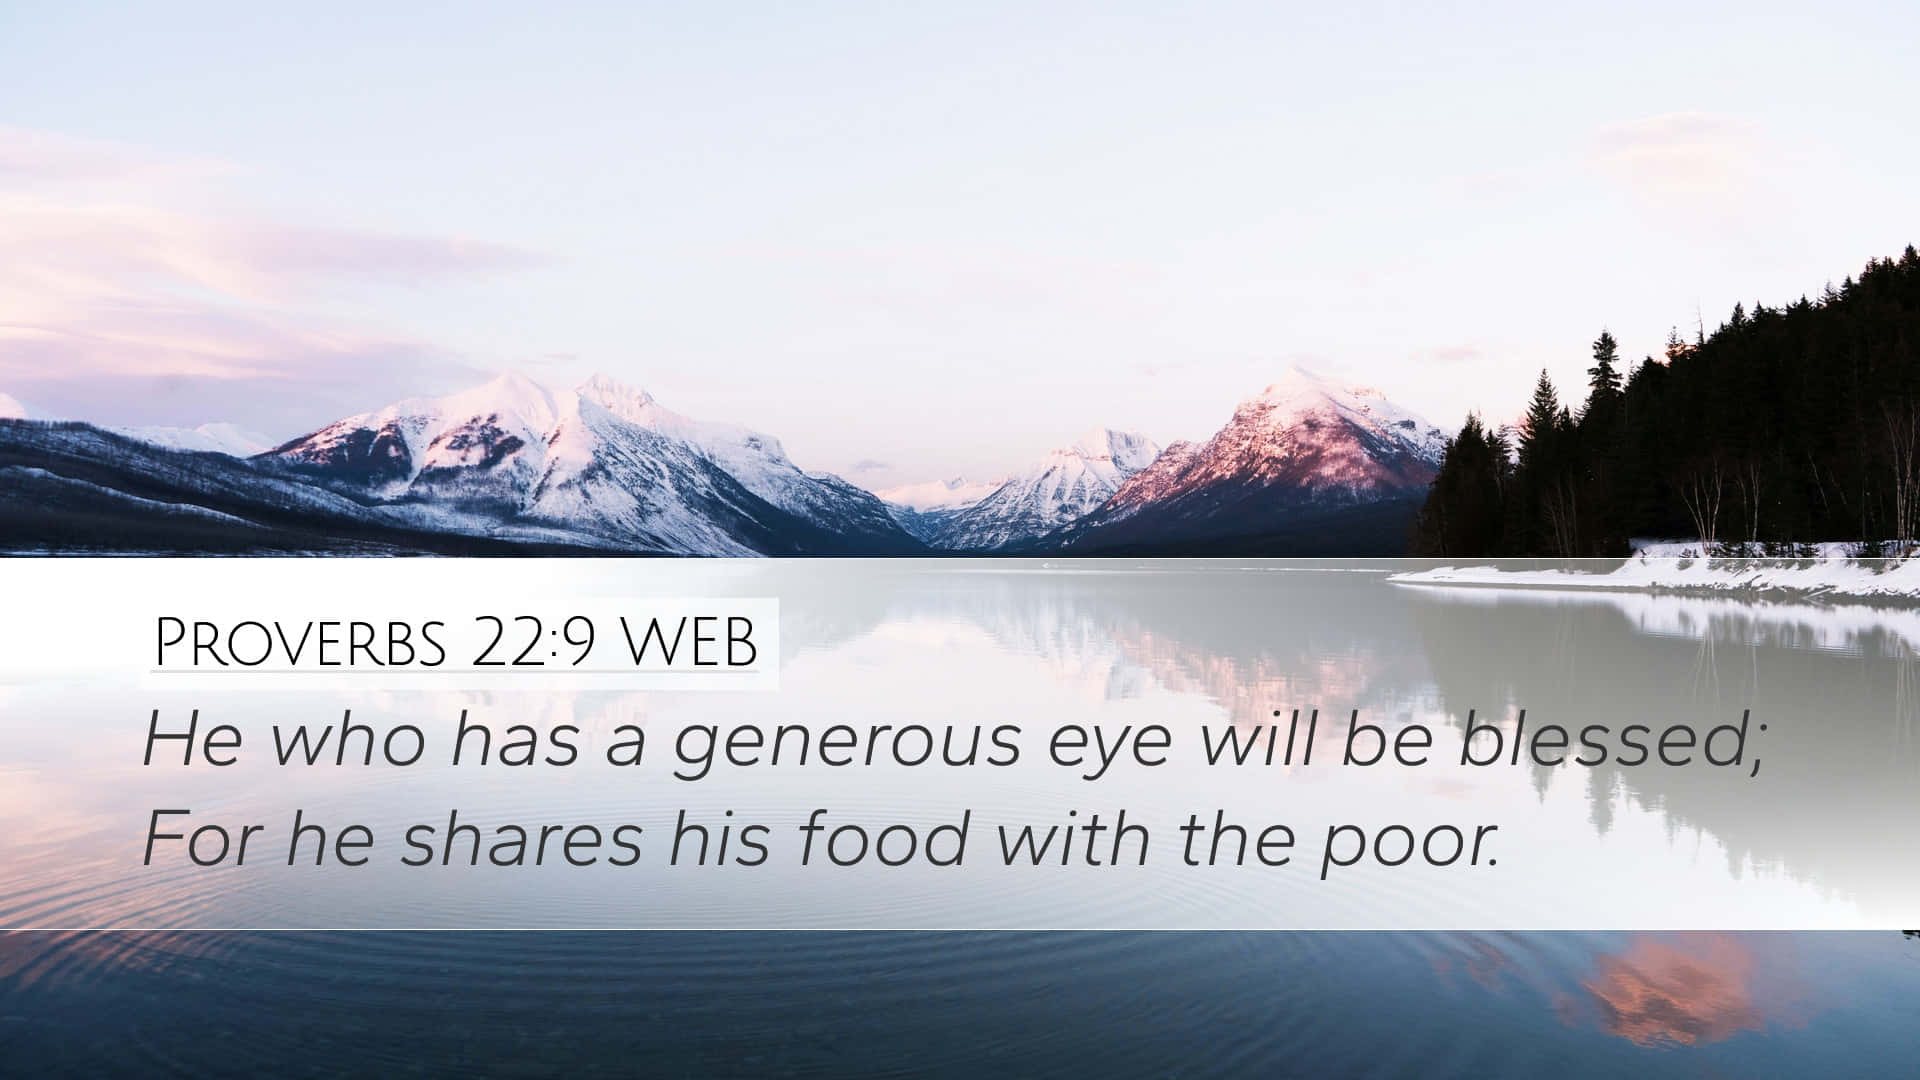 Bible Verse From Proverbs About Being Generous Wallpaper